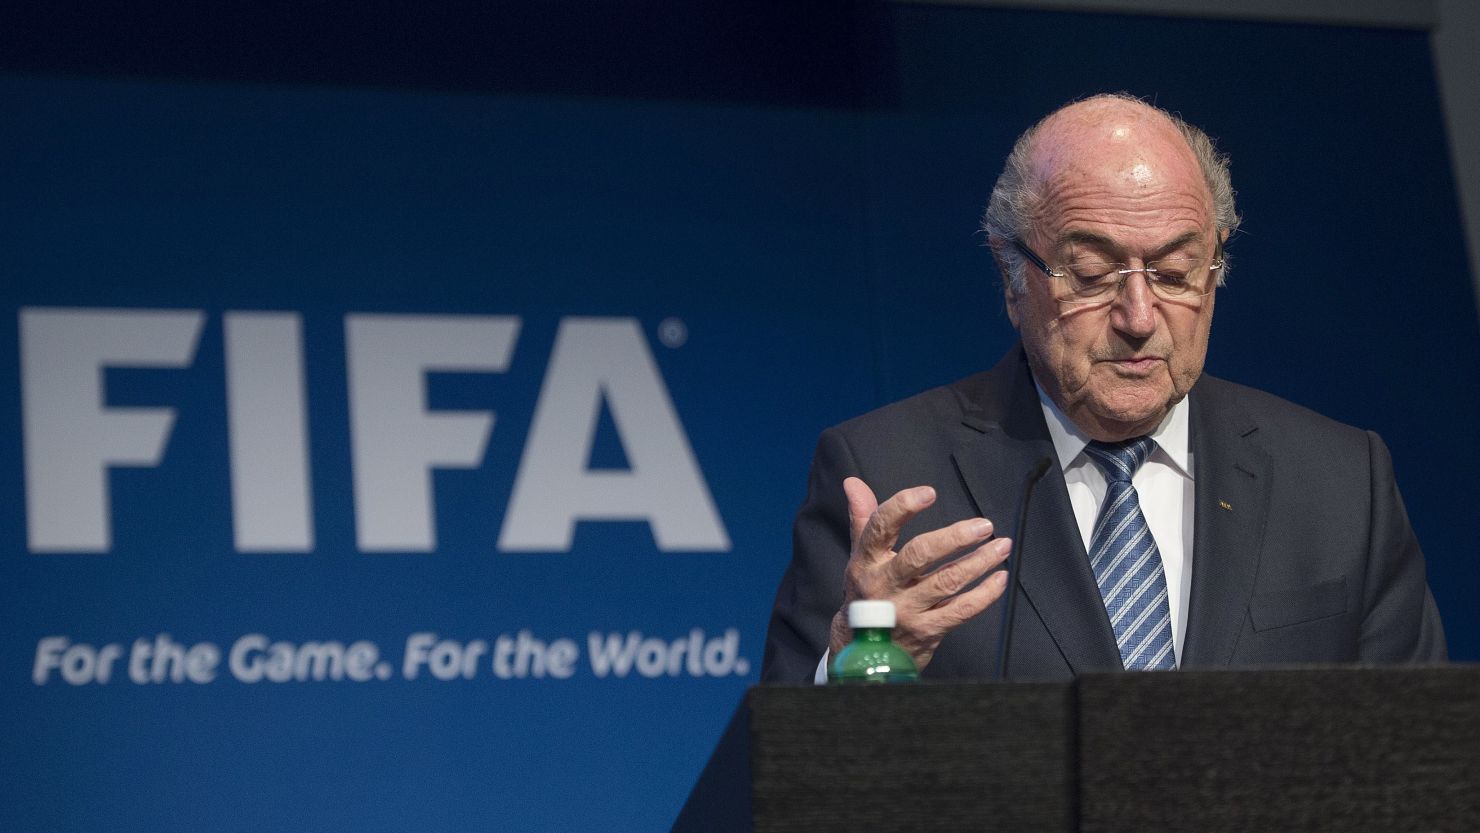 FIFA chief Sepp Blatter has announced he will step down as world soccer's top official.